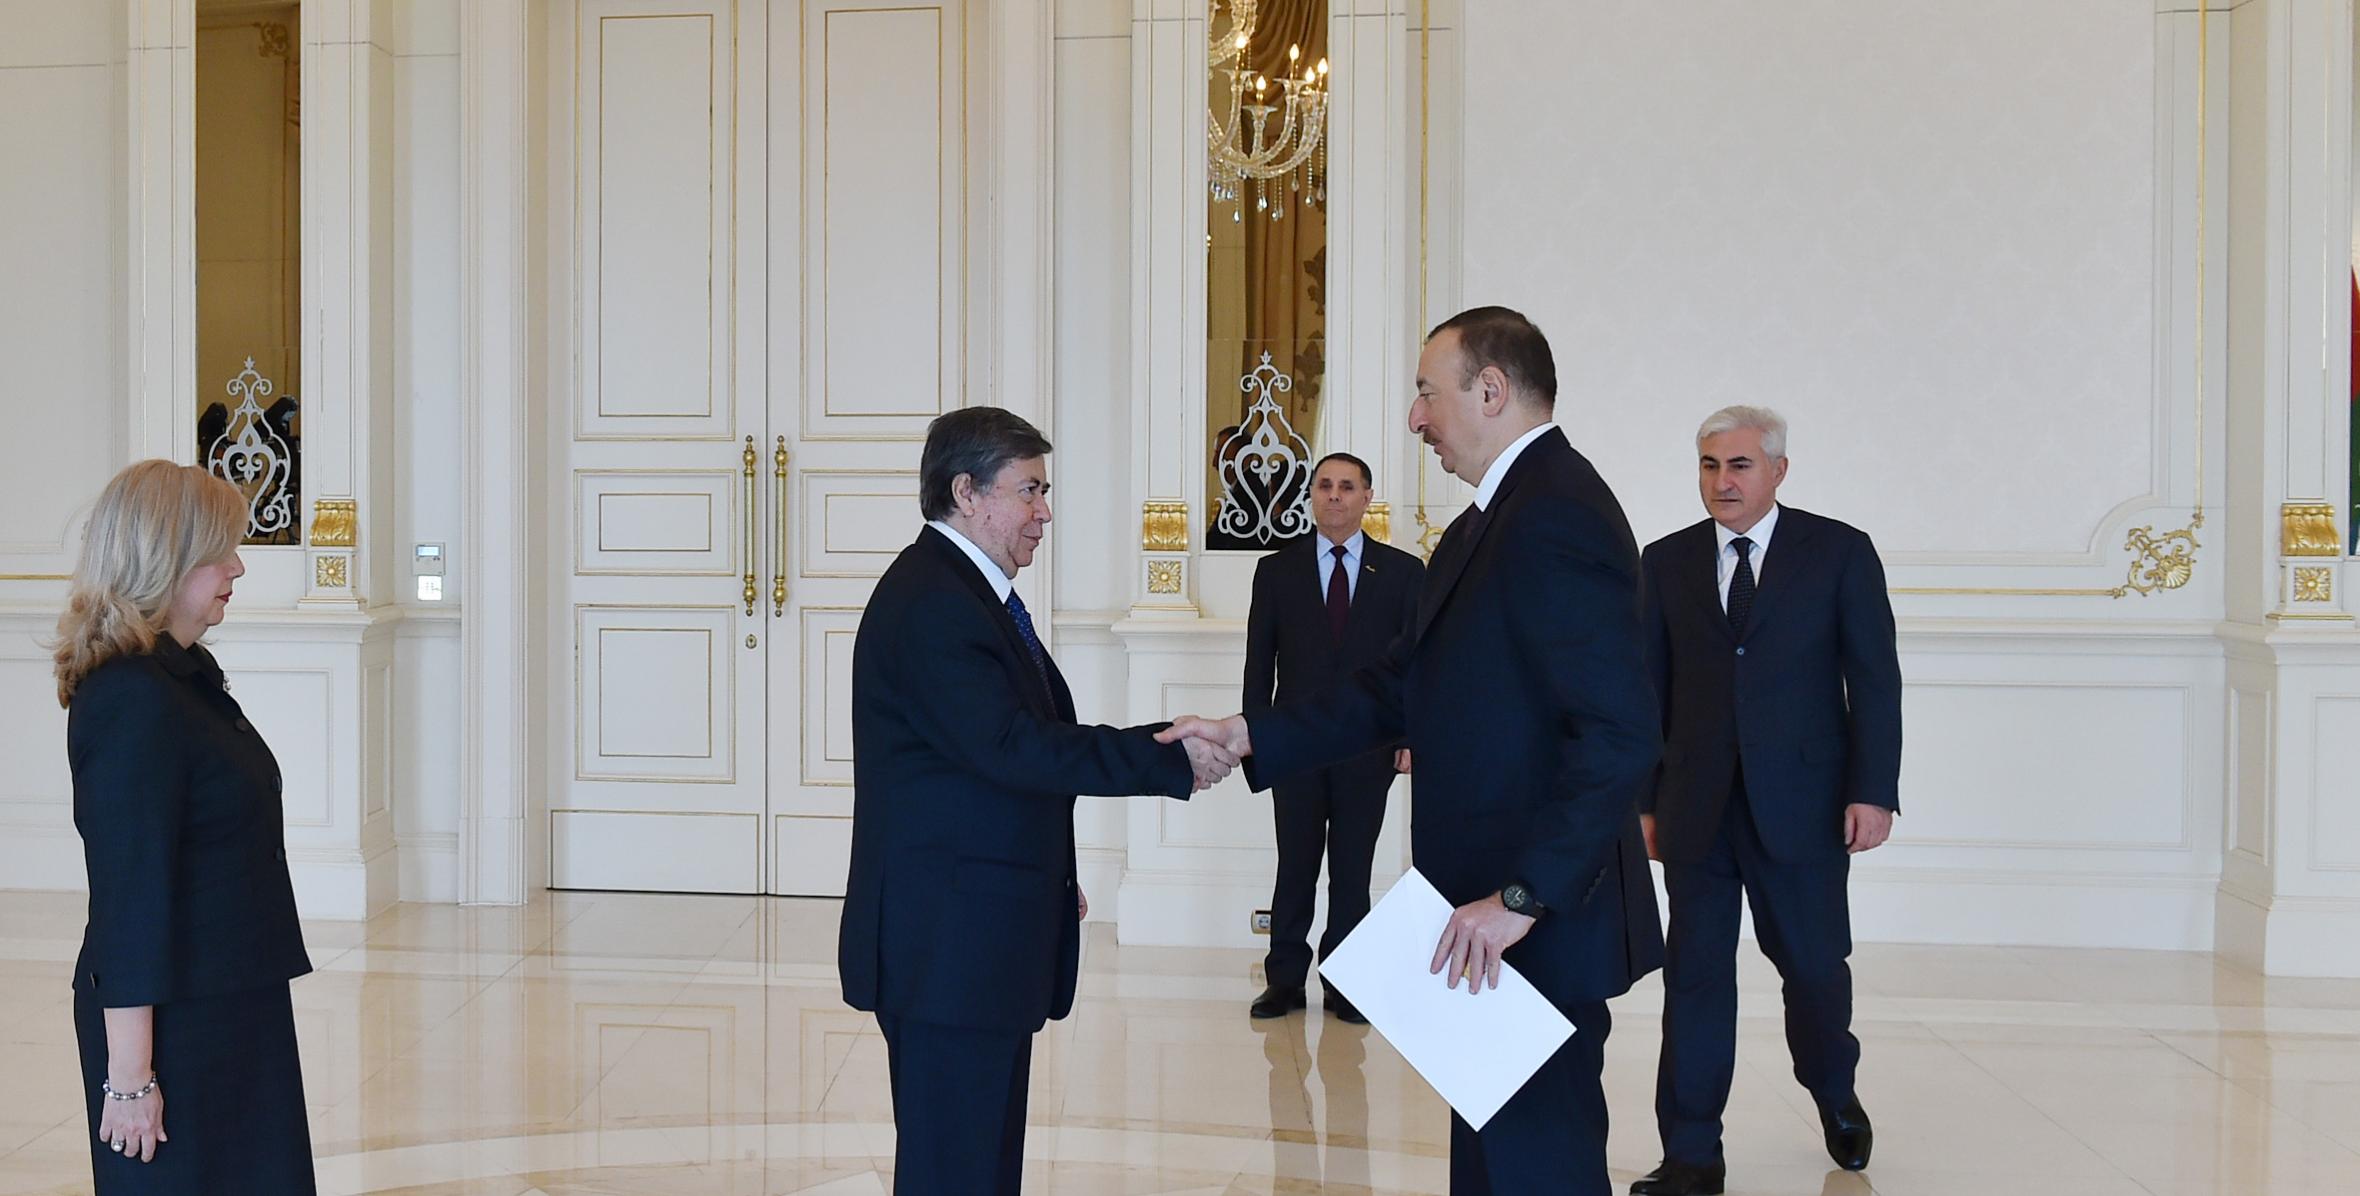 Ilham Aliyev received the credentials of the newly-appointed Ambassador of Peru